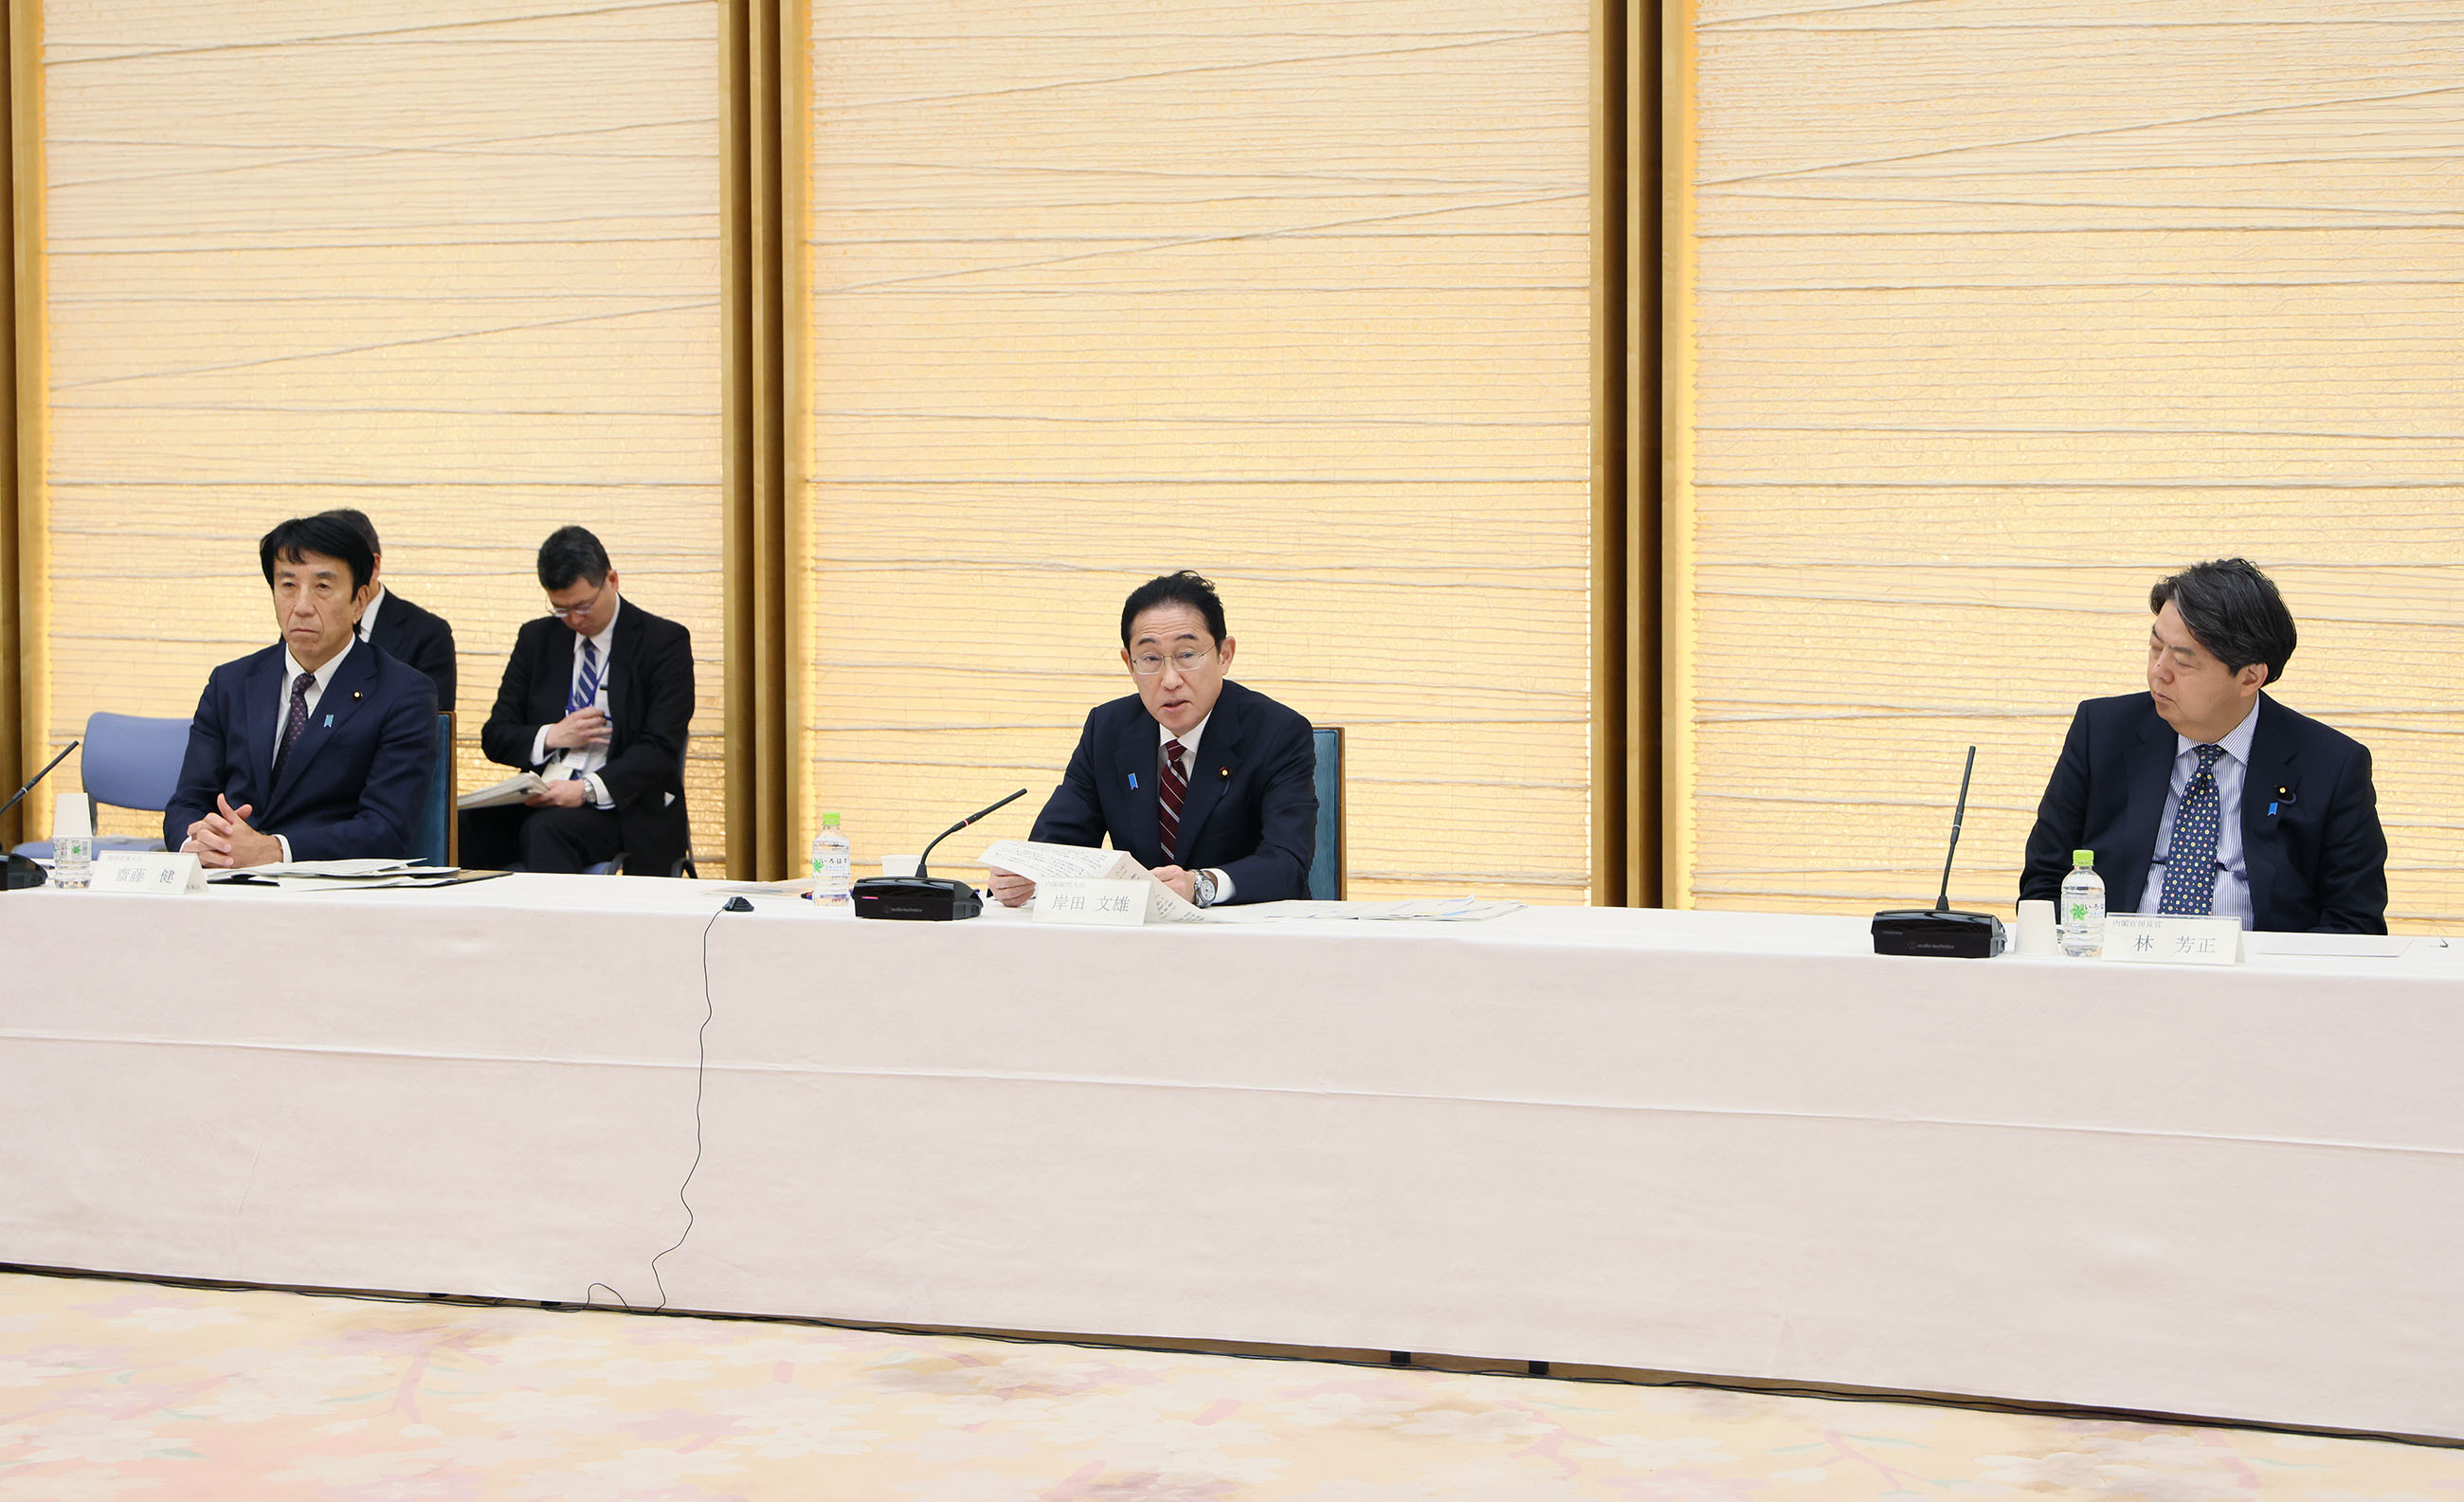 Prime Minister Kishida wrapping up the meeting (1)